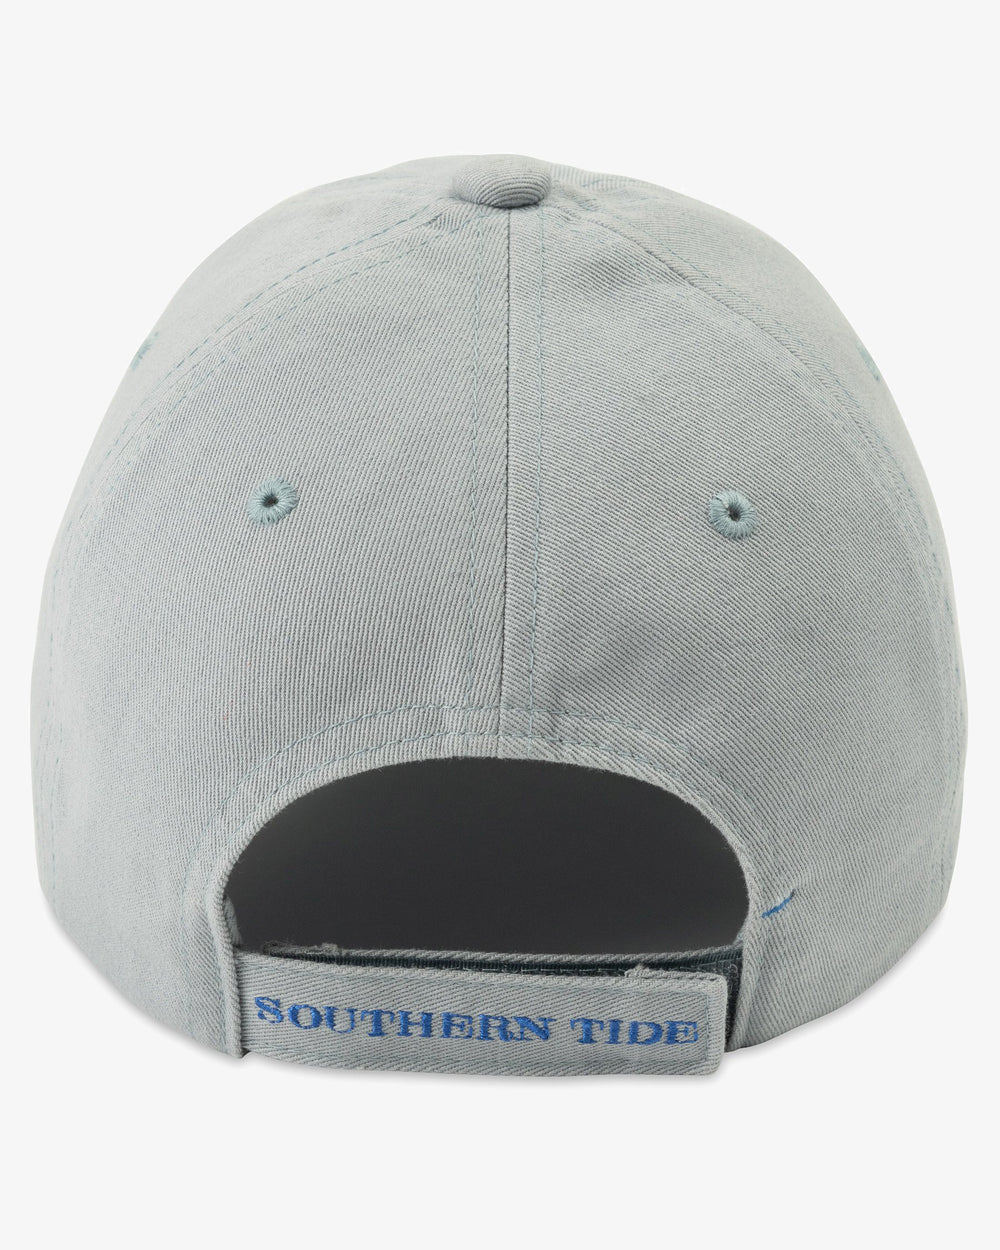 The back view of the Kid's Mini Skipjack Hat by Southern Tide - Steel Grey